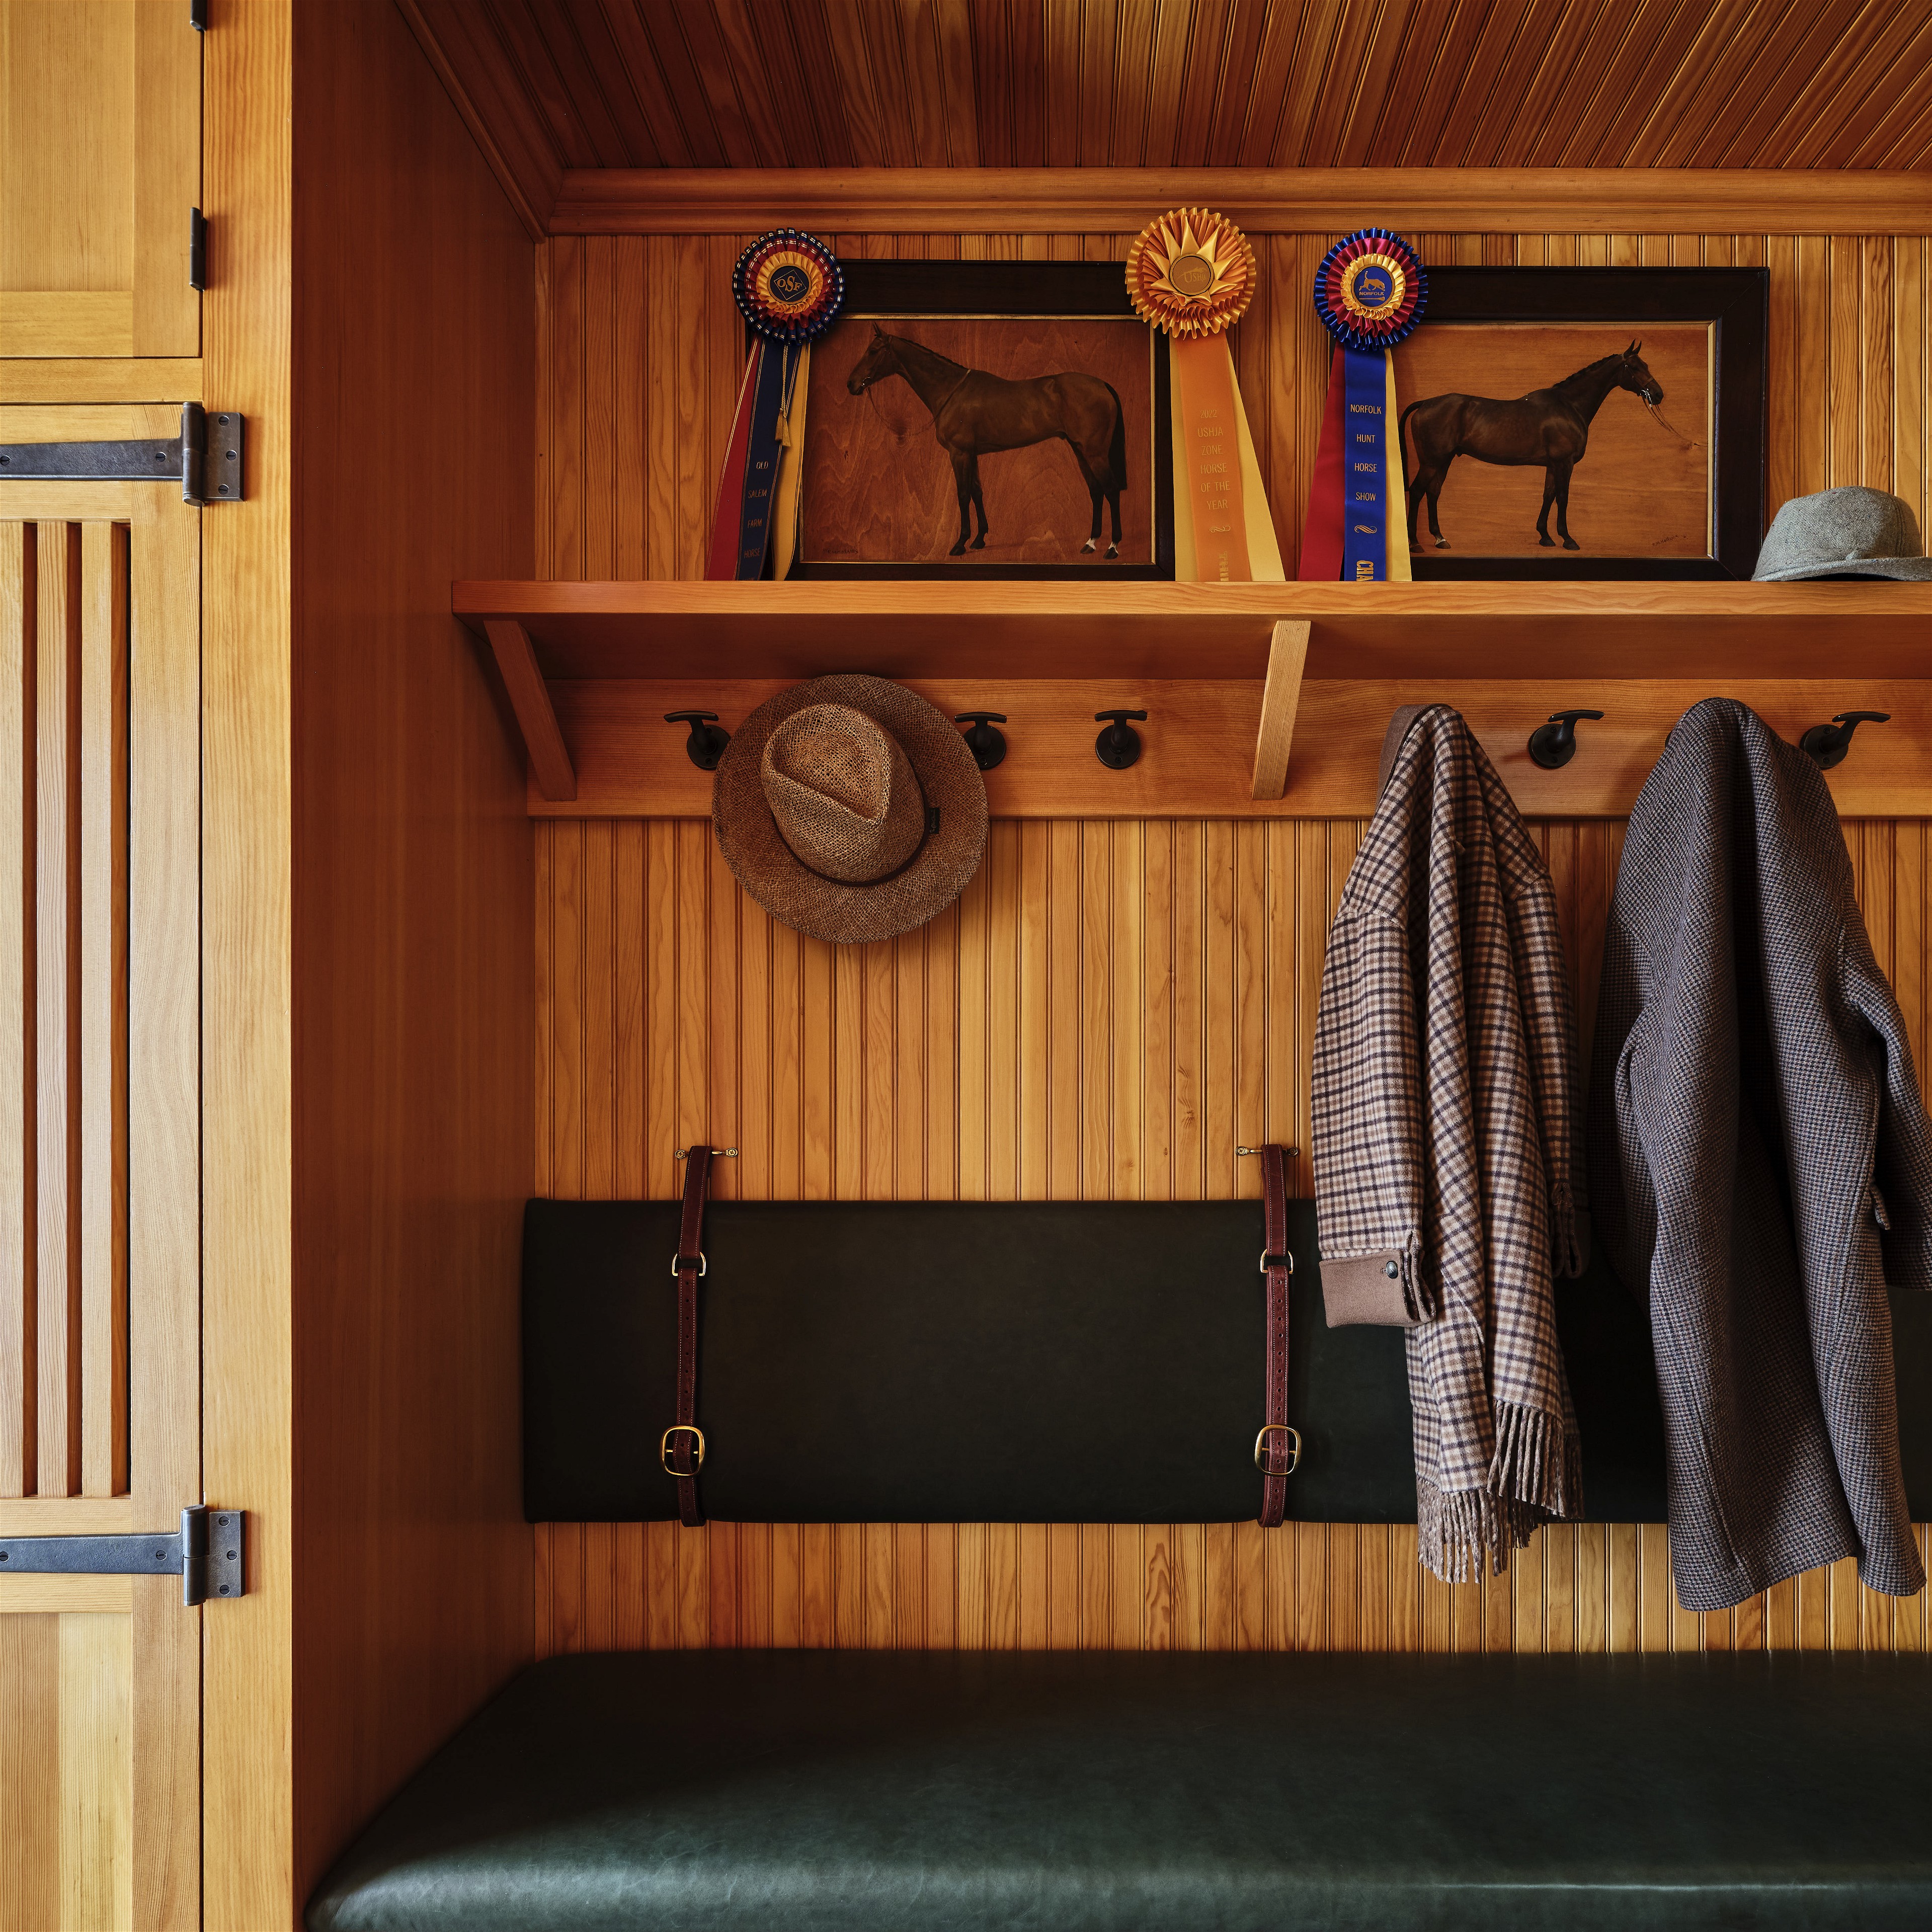 a bench and coat rack in a wooden room